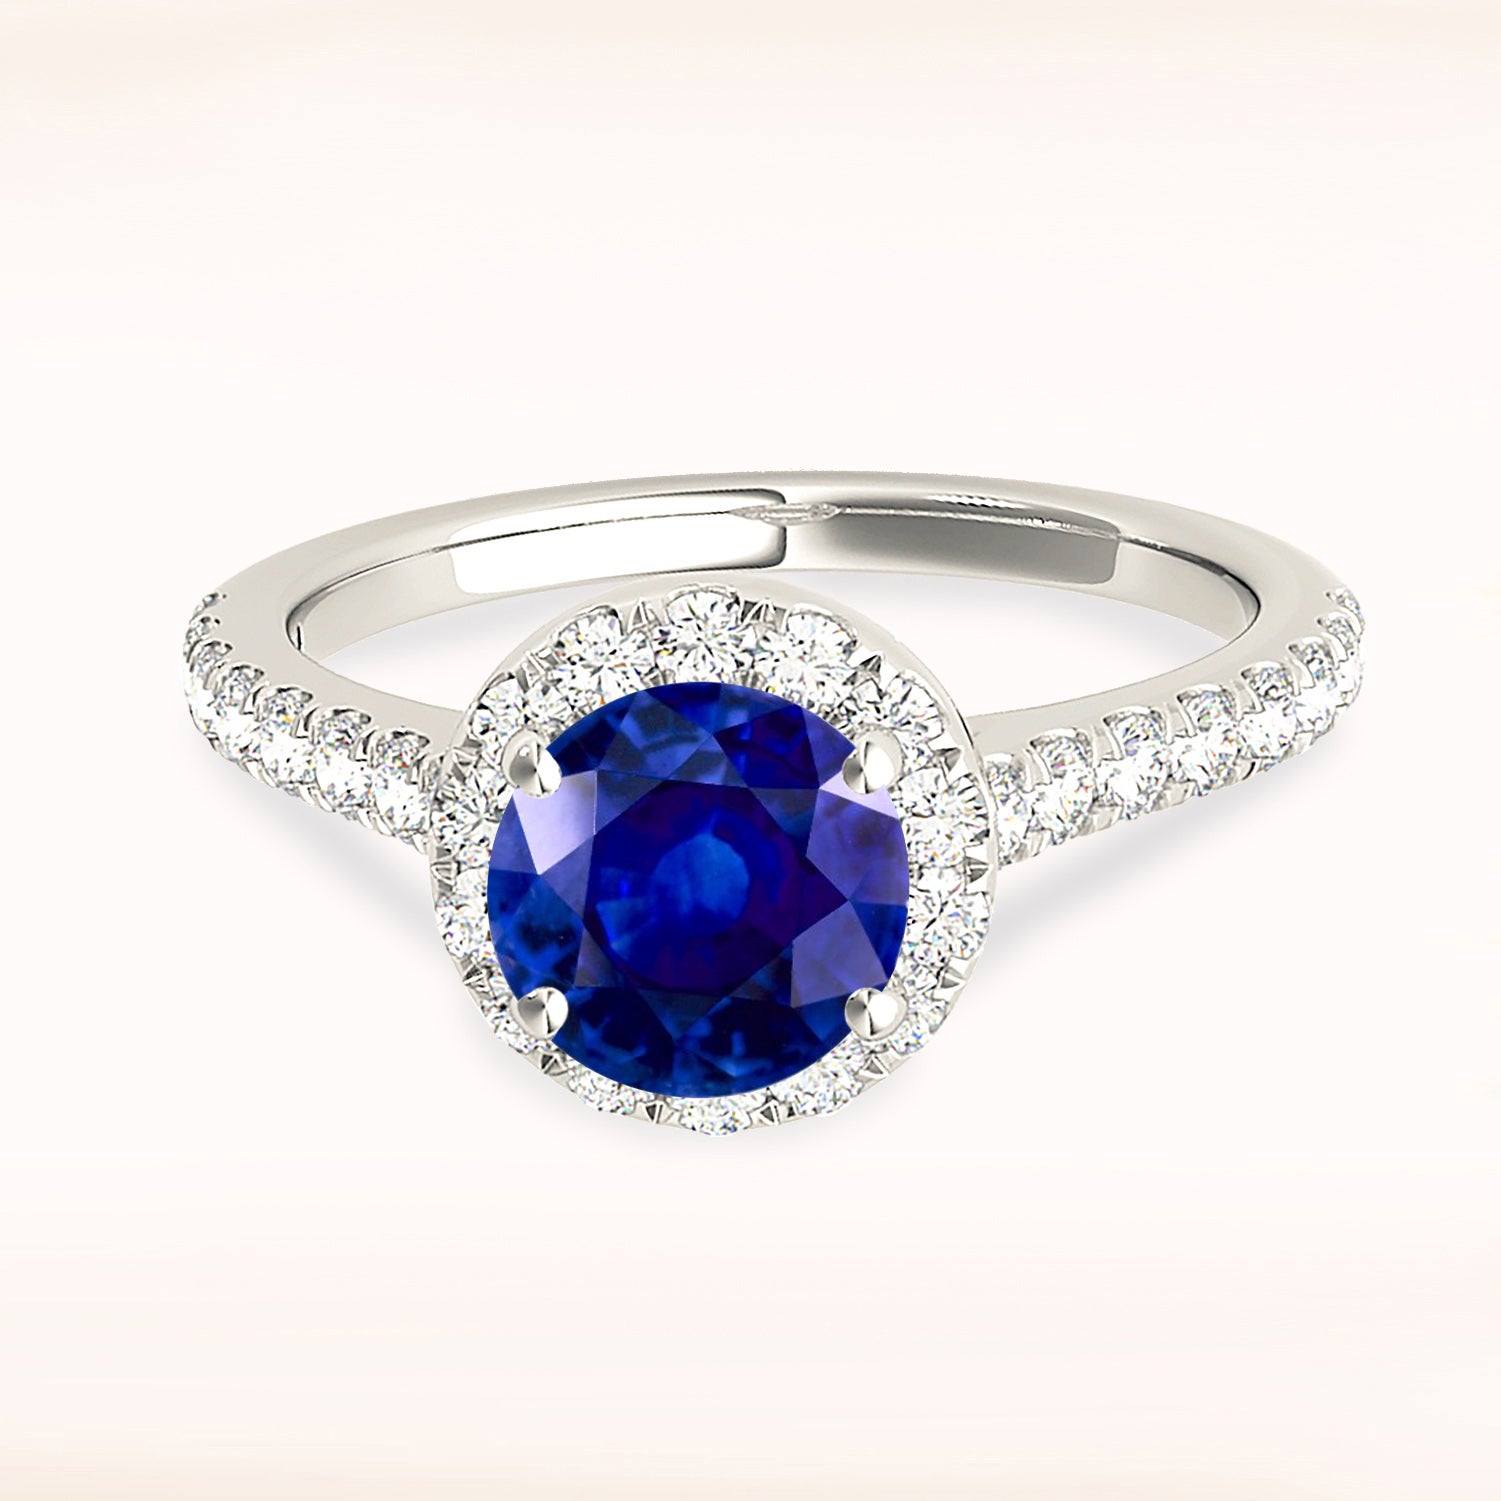 1.35 ct. Genuine Blue Sapphire Halo Ring With 0.35 ctw. Side Diamonds-in 14K/18K White, Yellow, Rose Gold and Platinum - Christmas Jewelry Gift -VIRABYANI